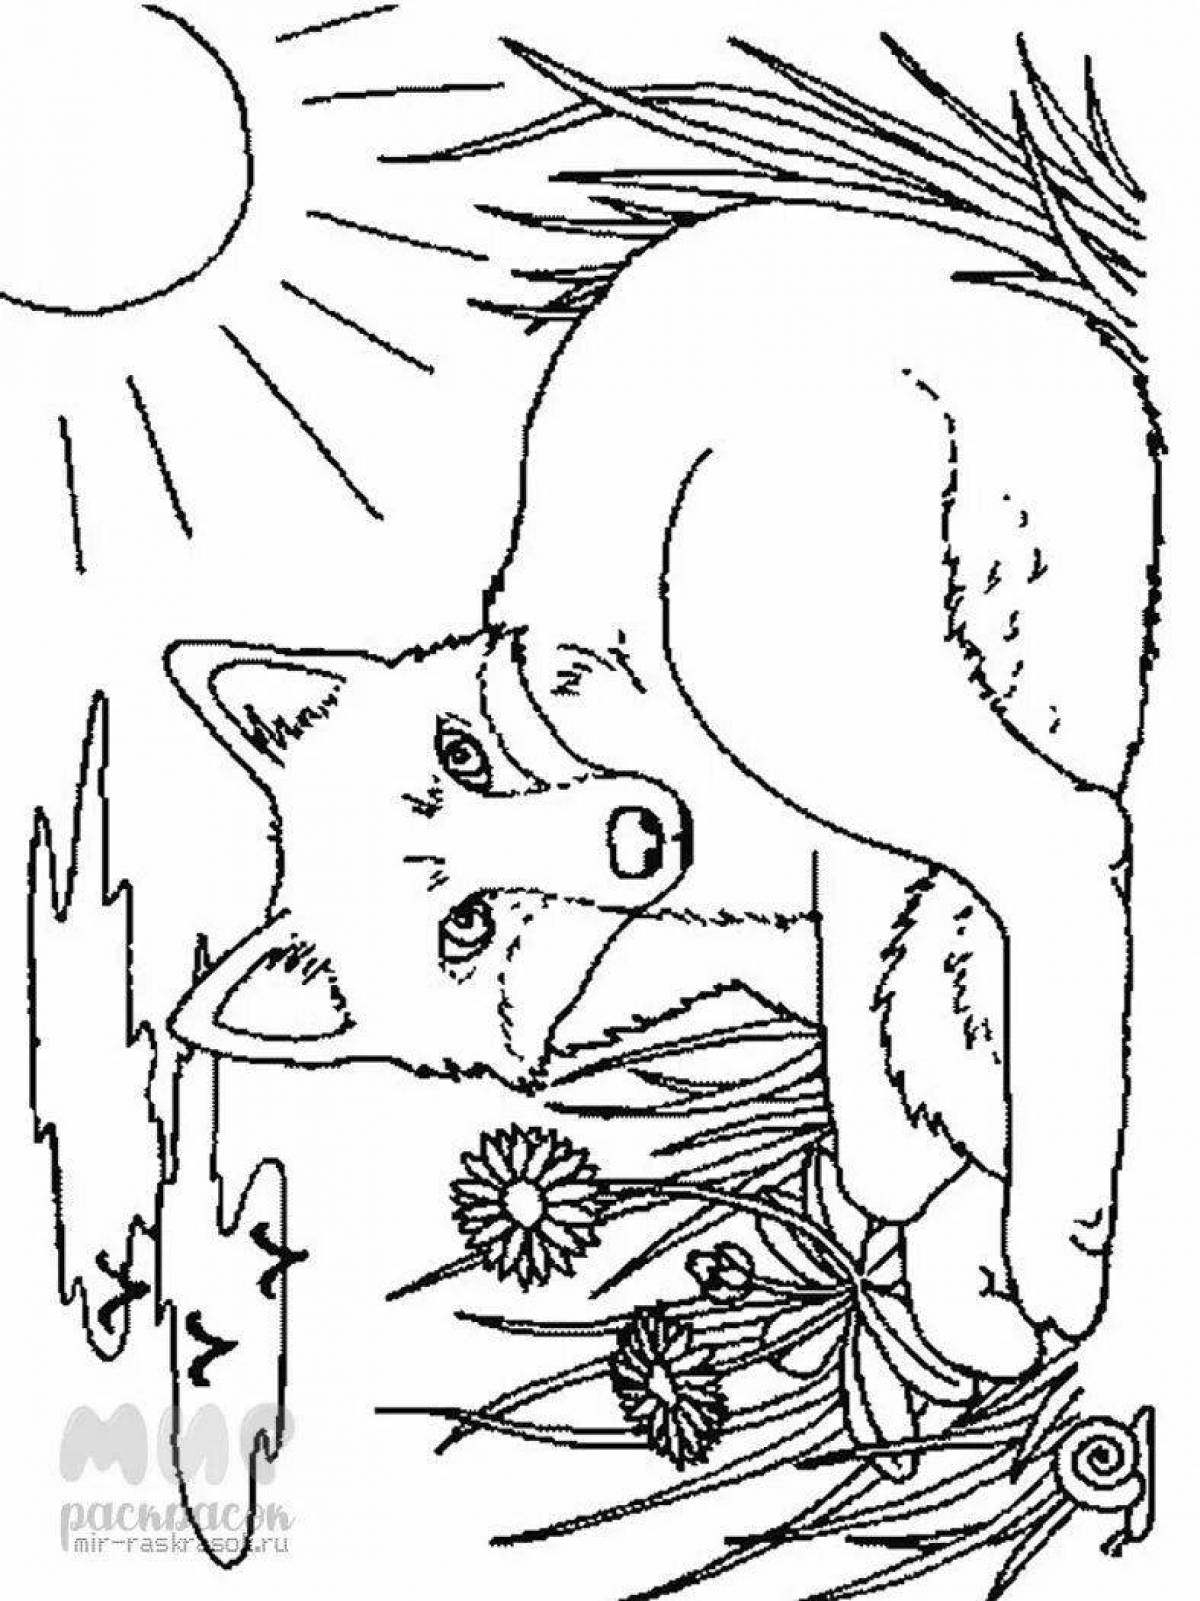 Coloring page blissful fox and bianca mouse